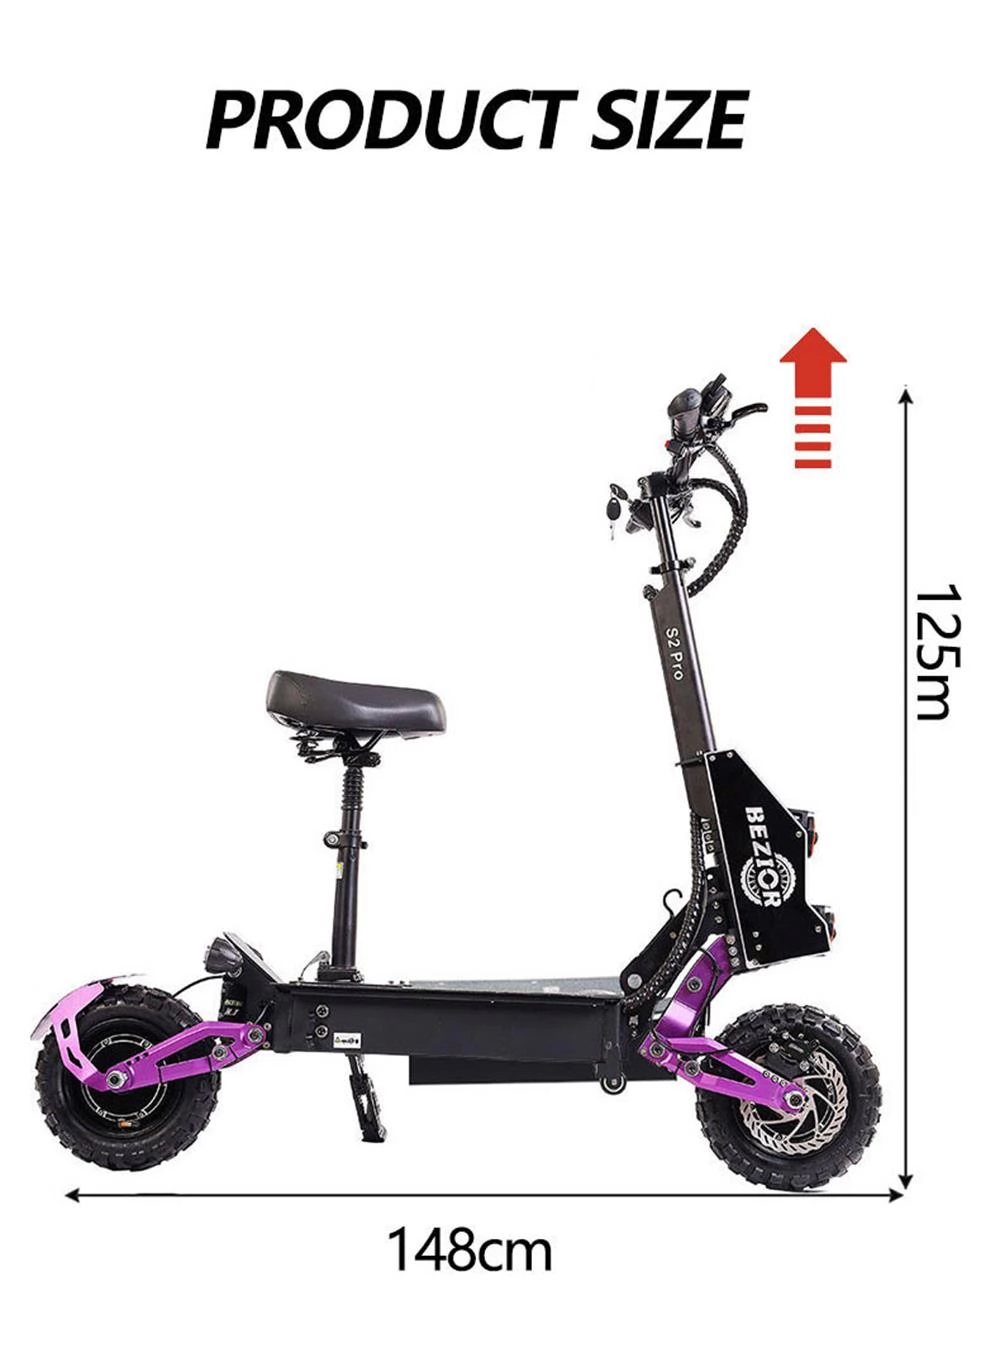 BEZIOR S2 PRO 11 Tire Electric Off-Road Scooter, 1200W*2 Dual Motor, 23Ah Battery, 65km/h Max Speed